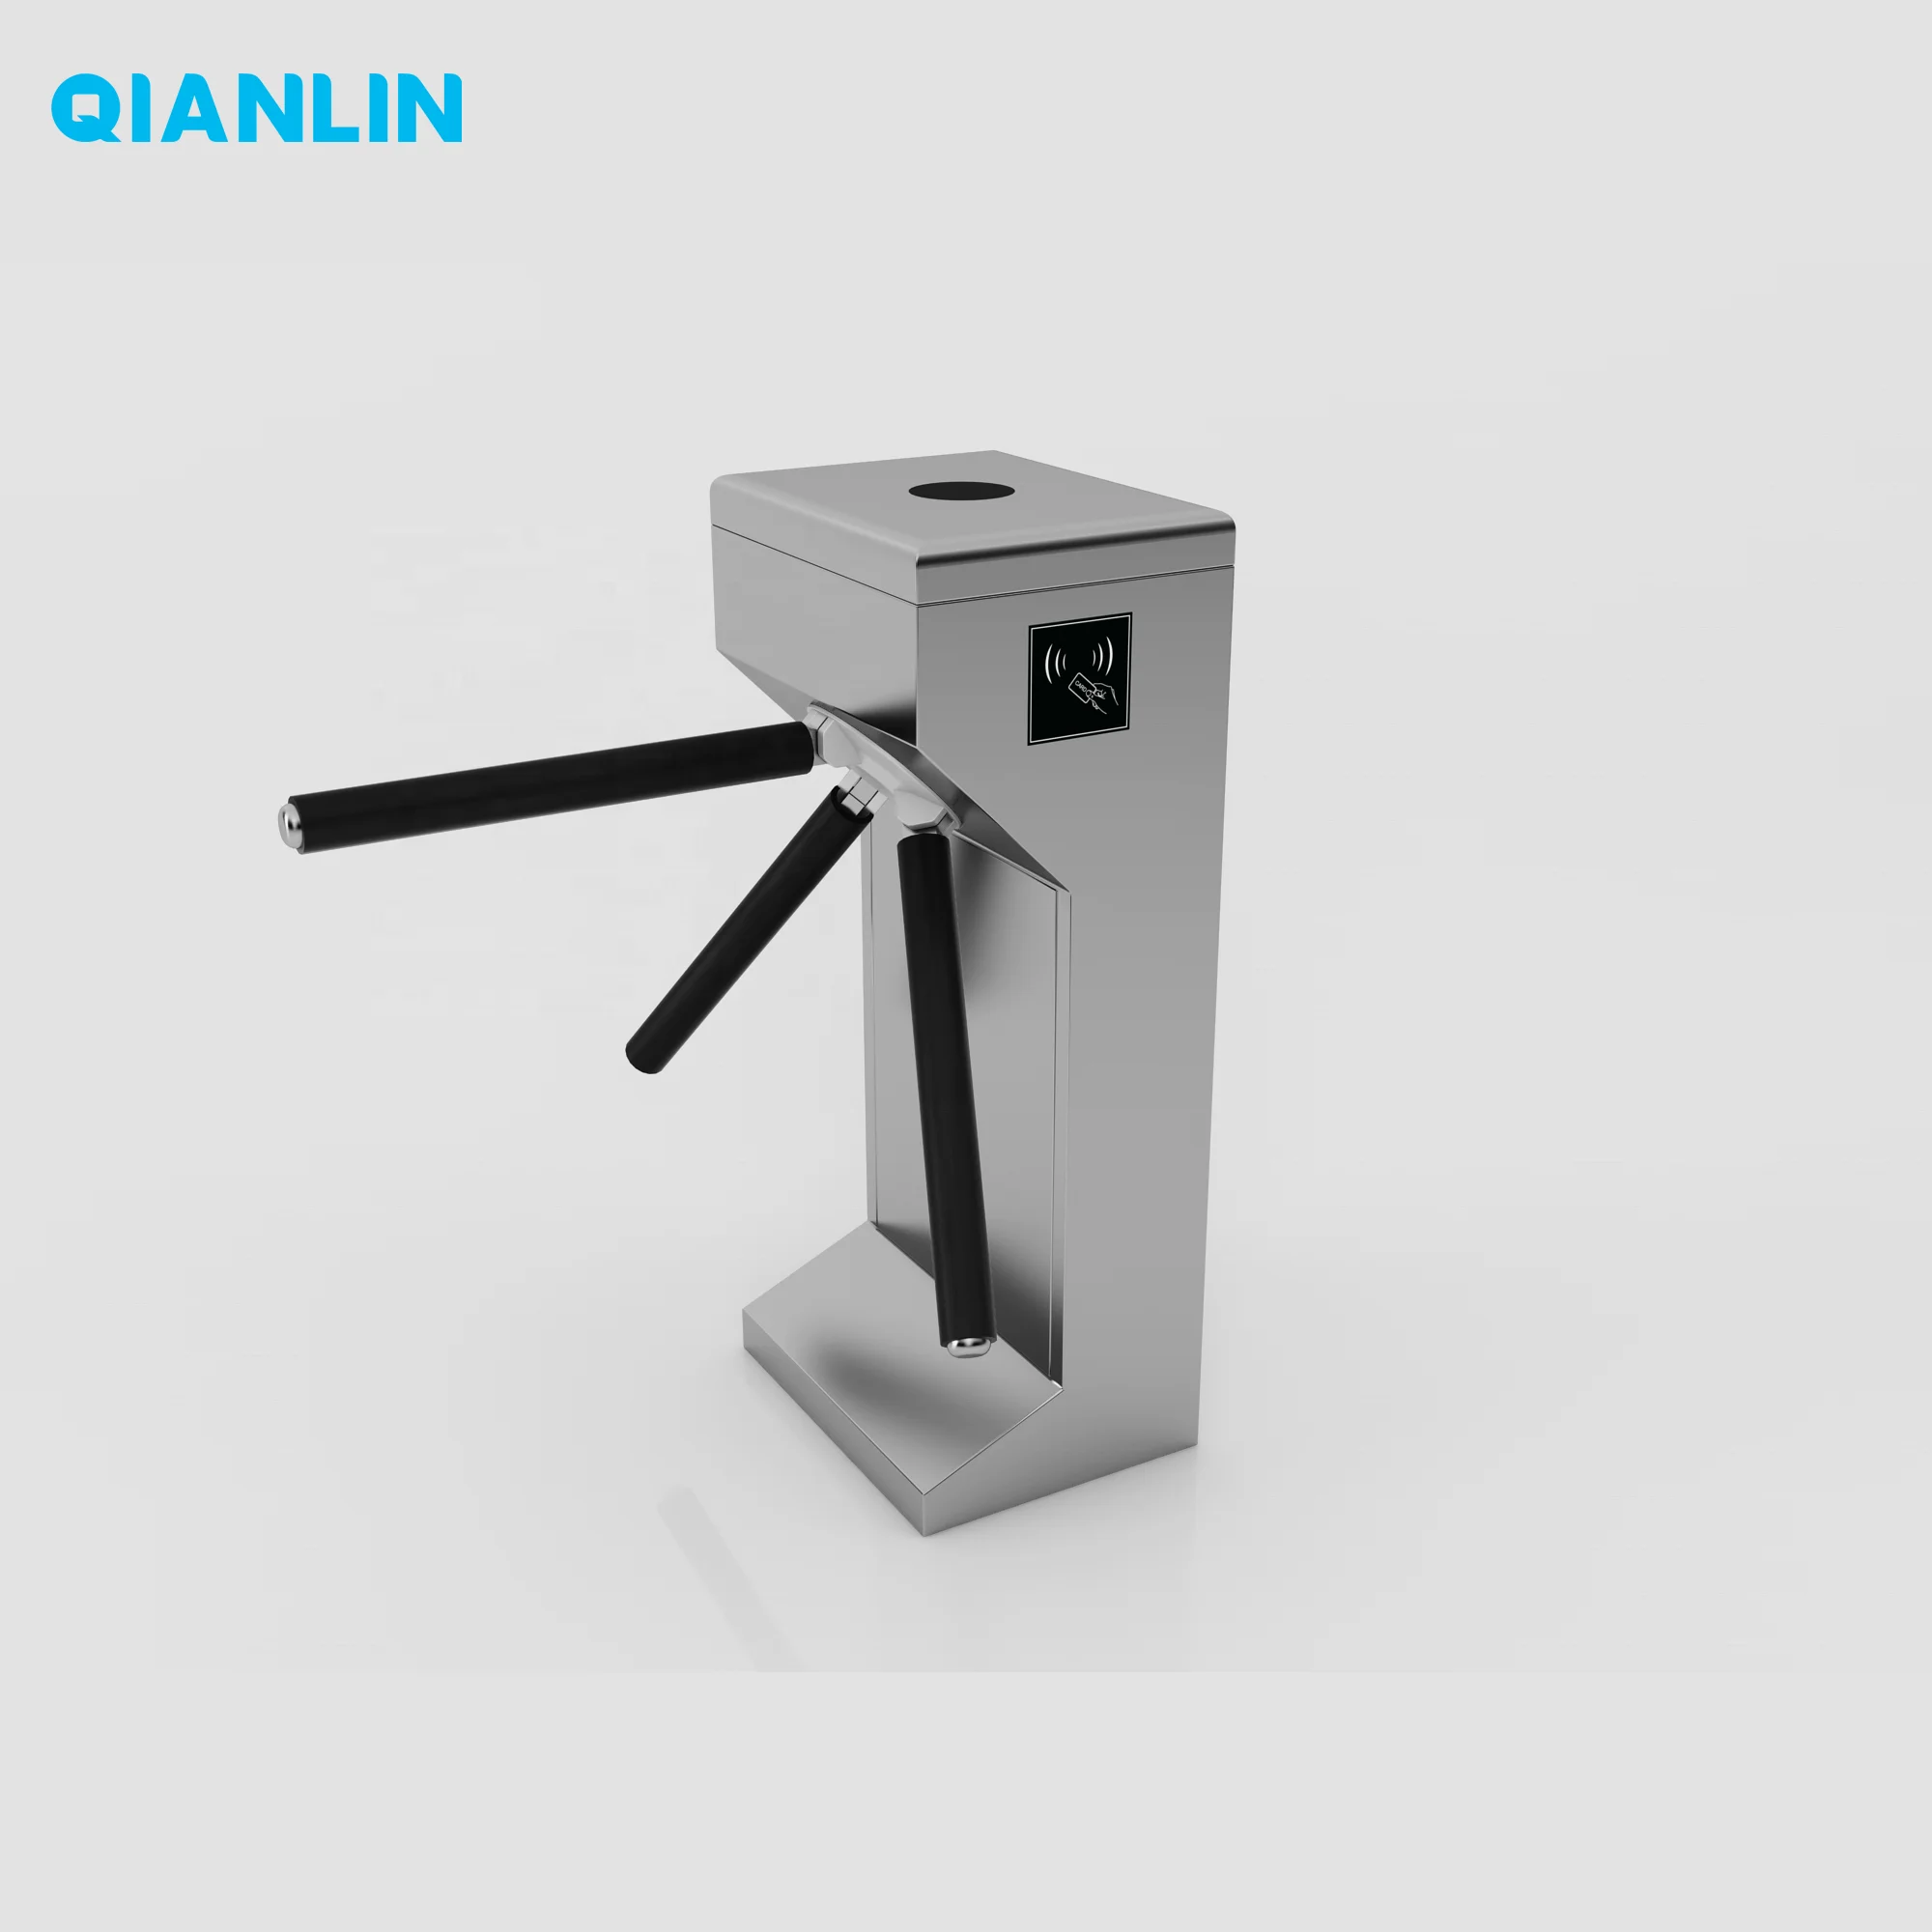 

Hot Selling Security Tripod Turnstile Barrier Gate in China 1 Piece 304 Stainless Steel Security Access Control Management 510mm